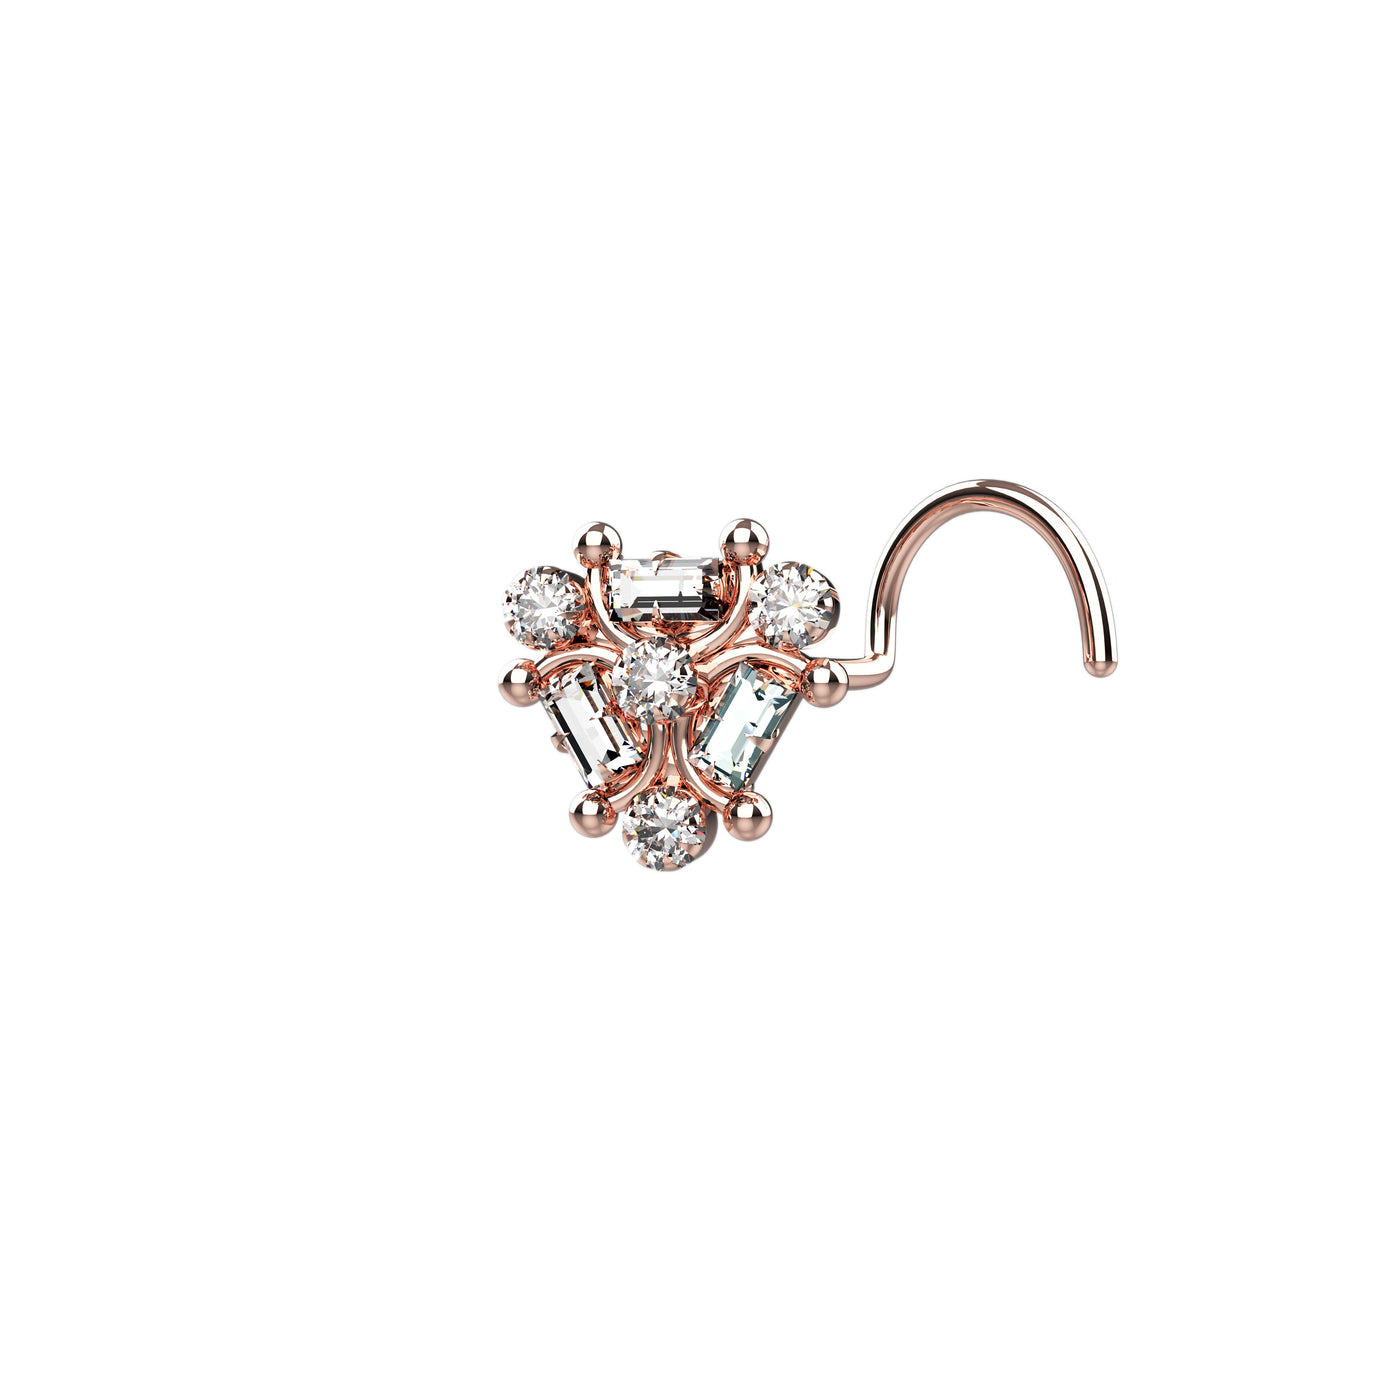 Twisting wire nose rings stud